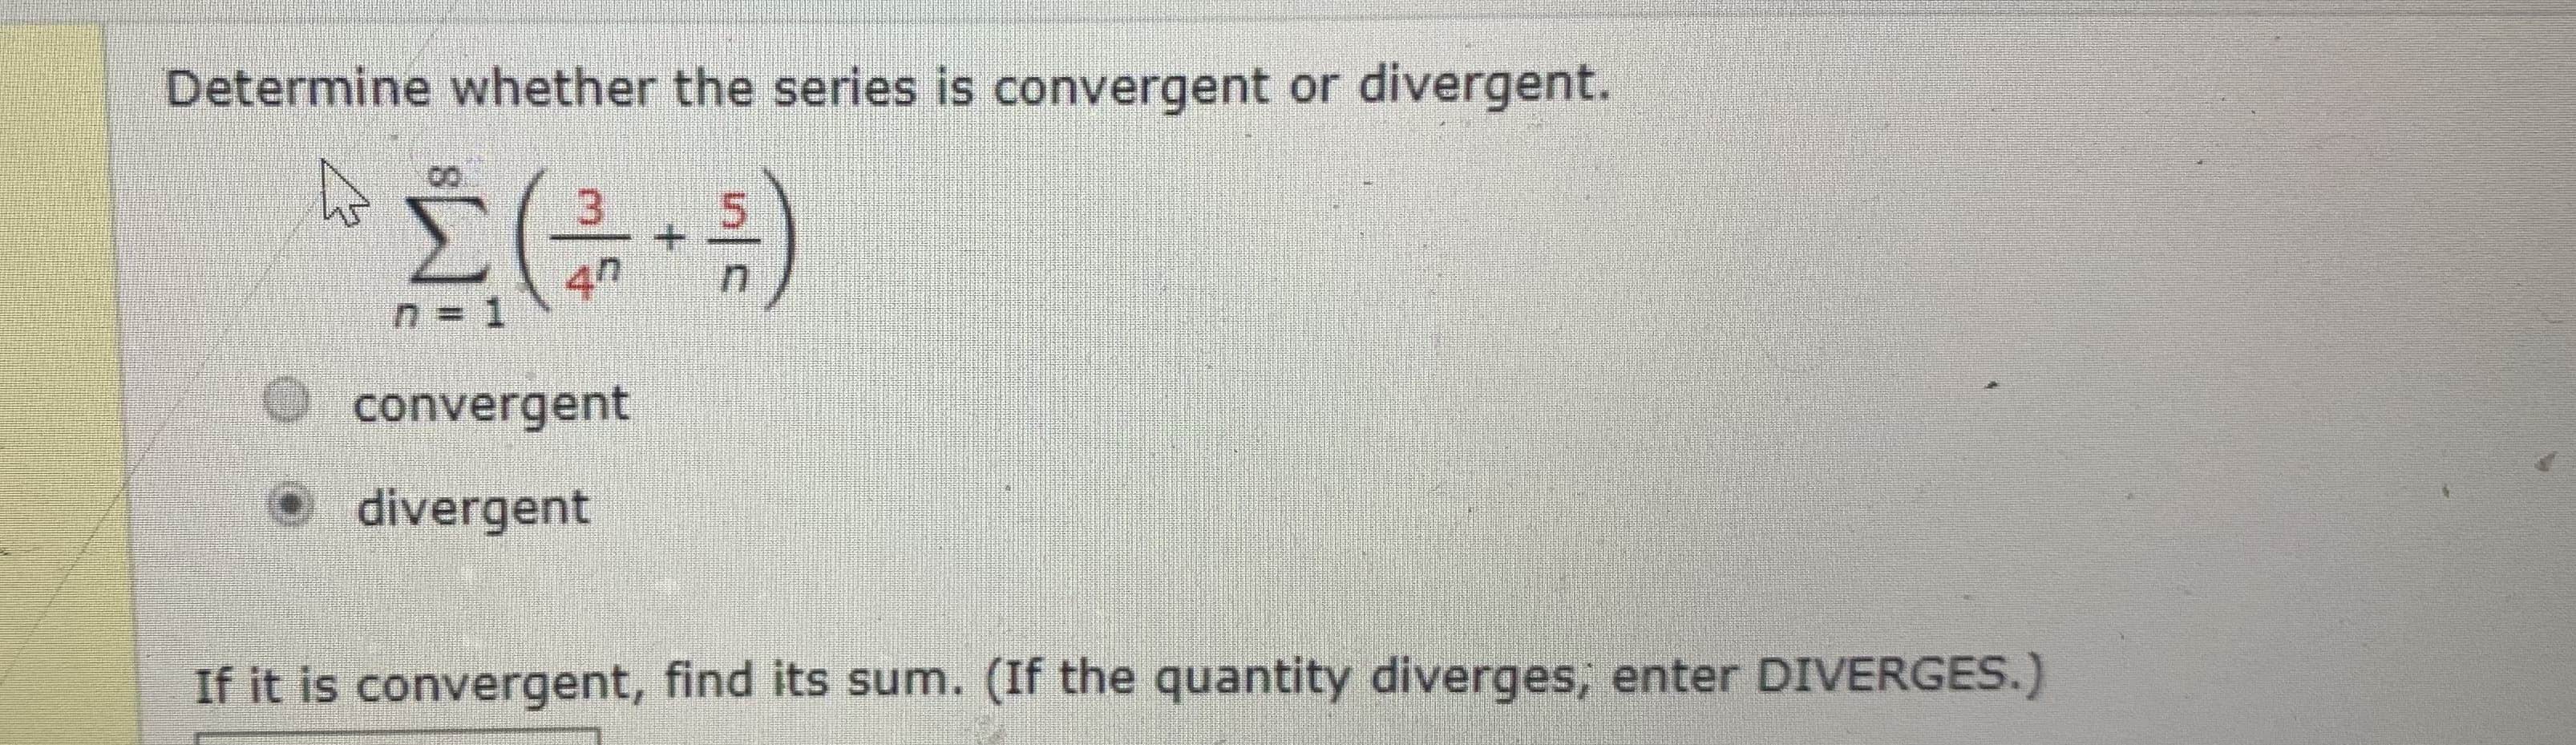 Determine whether the series is convergent or
divergent.
00
3
4h
n = 1
convergent
O divergent
